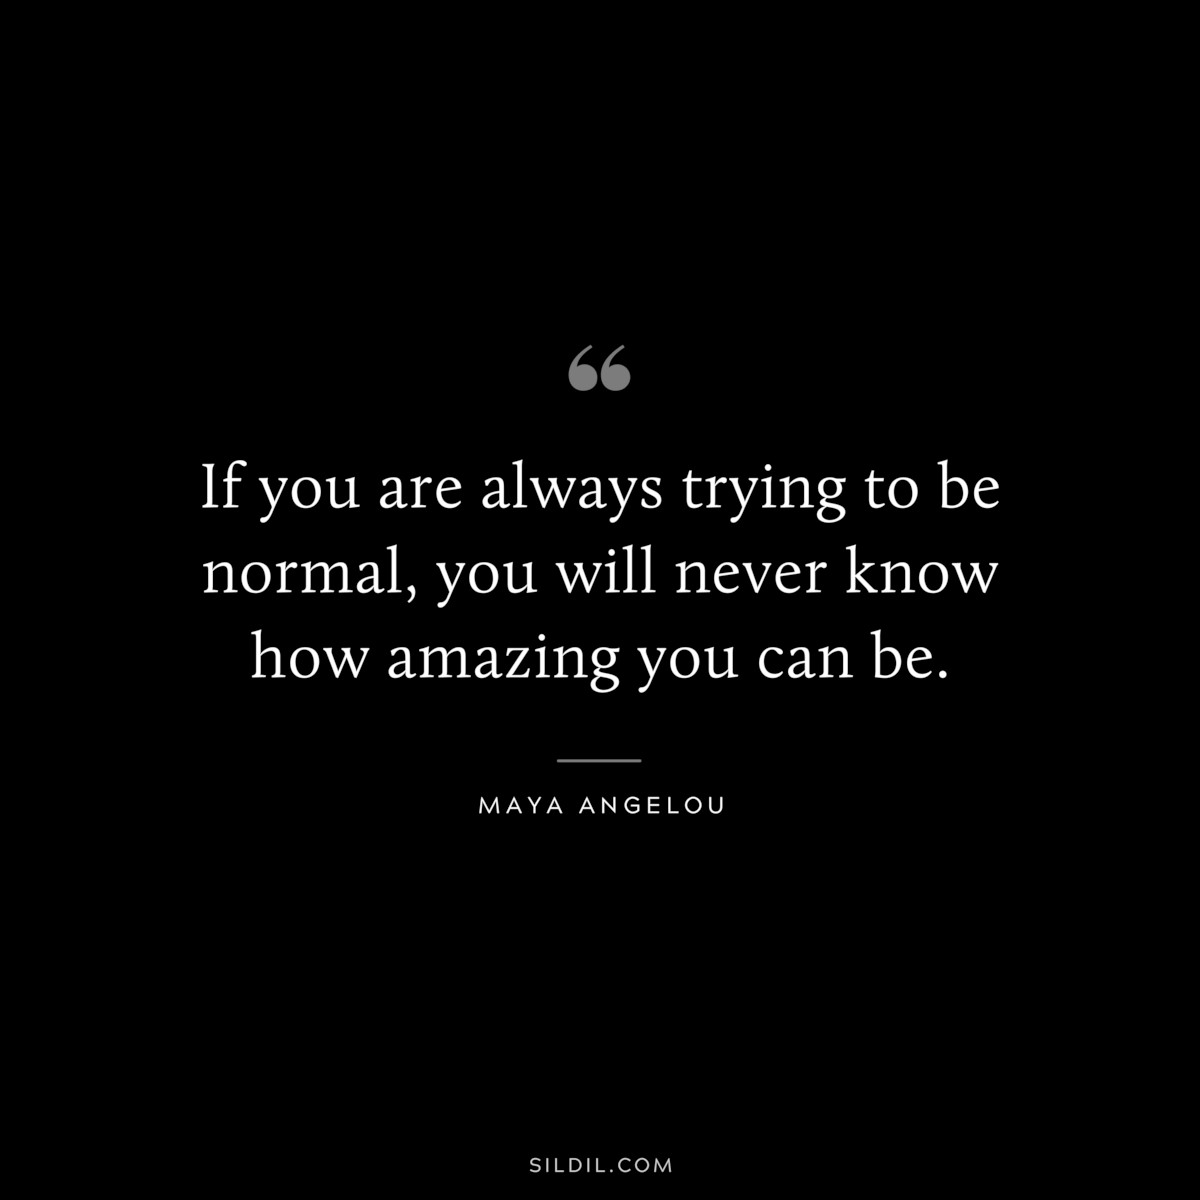 If you are always trying to be normal, you will never know how amazing you can be. ― Maya Angelou